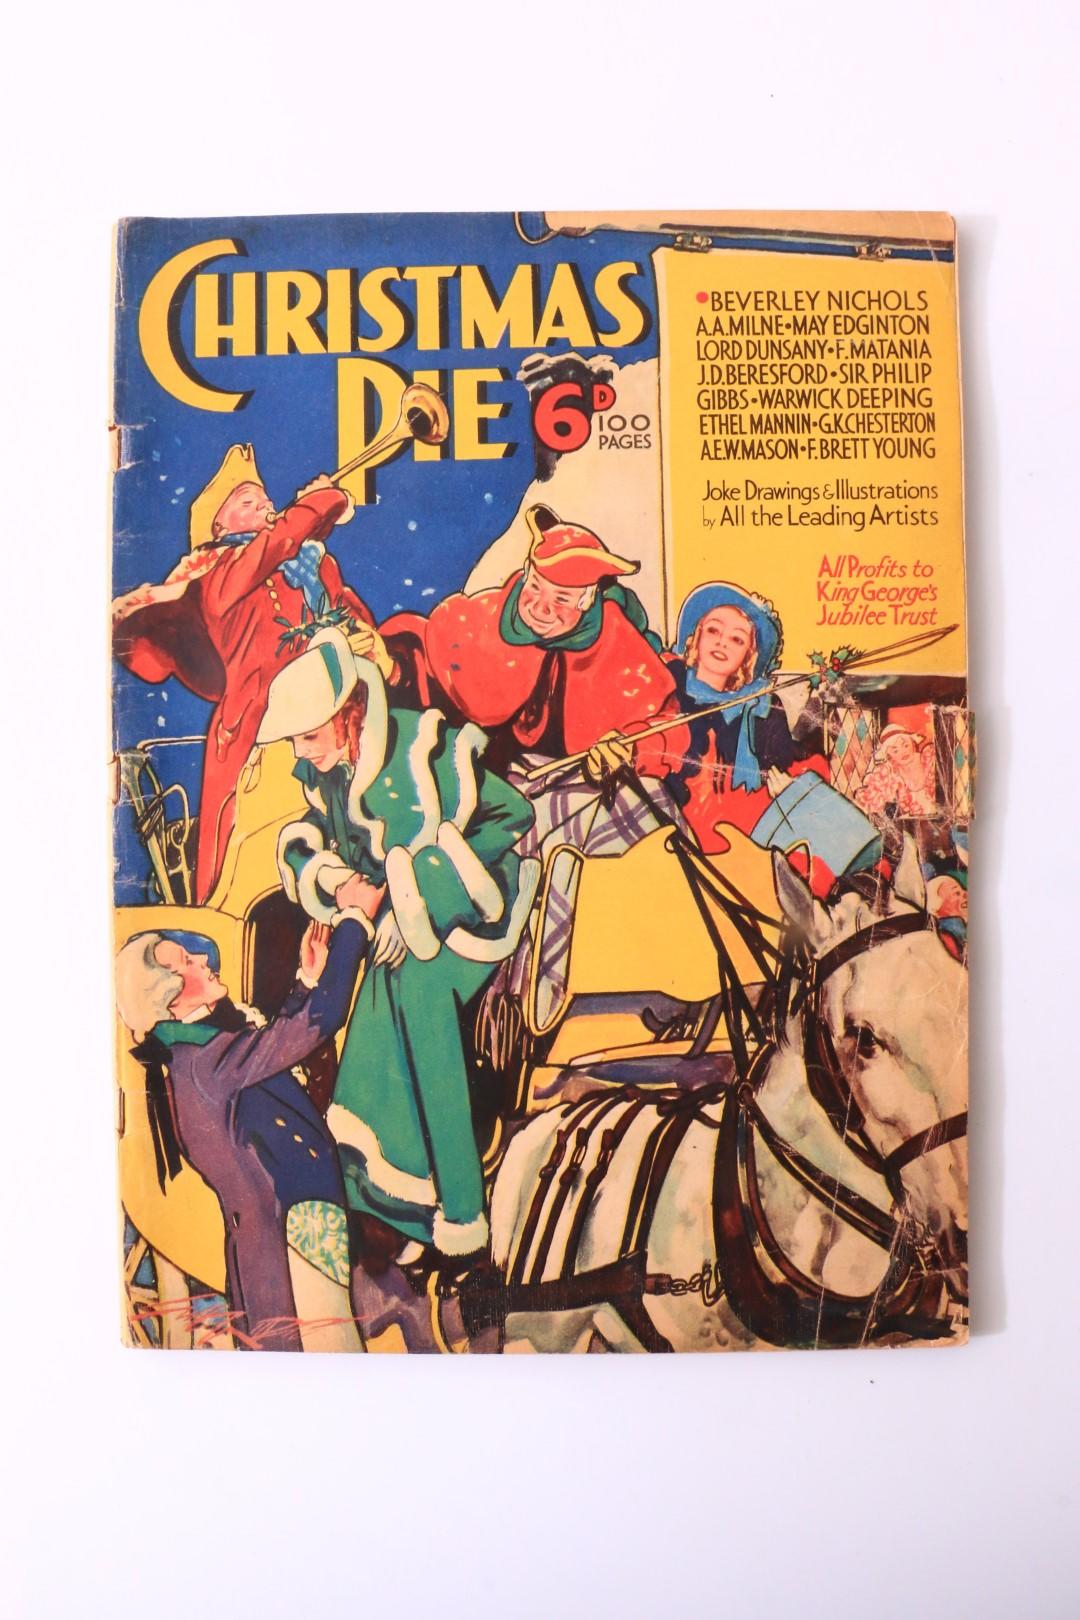 Various [including] A.A. Milne and Lord Dunsany - Christmas Pie - Odhams Press, 1935, First Edition.